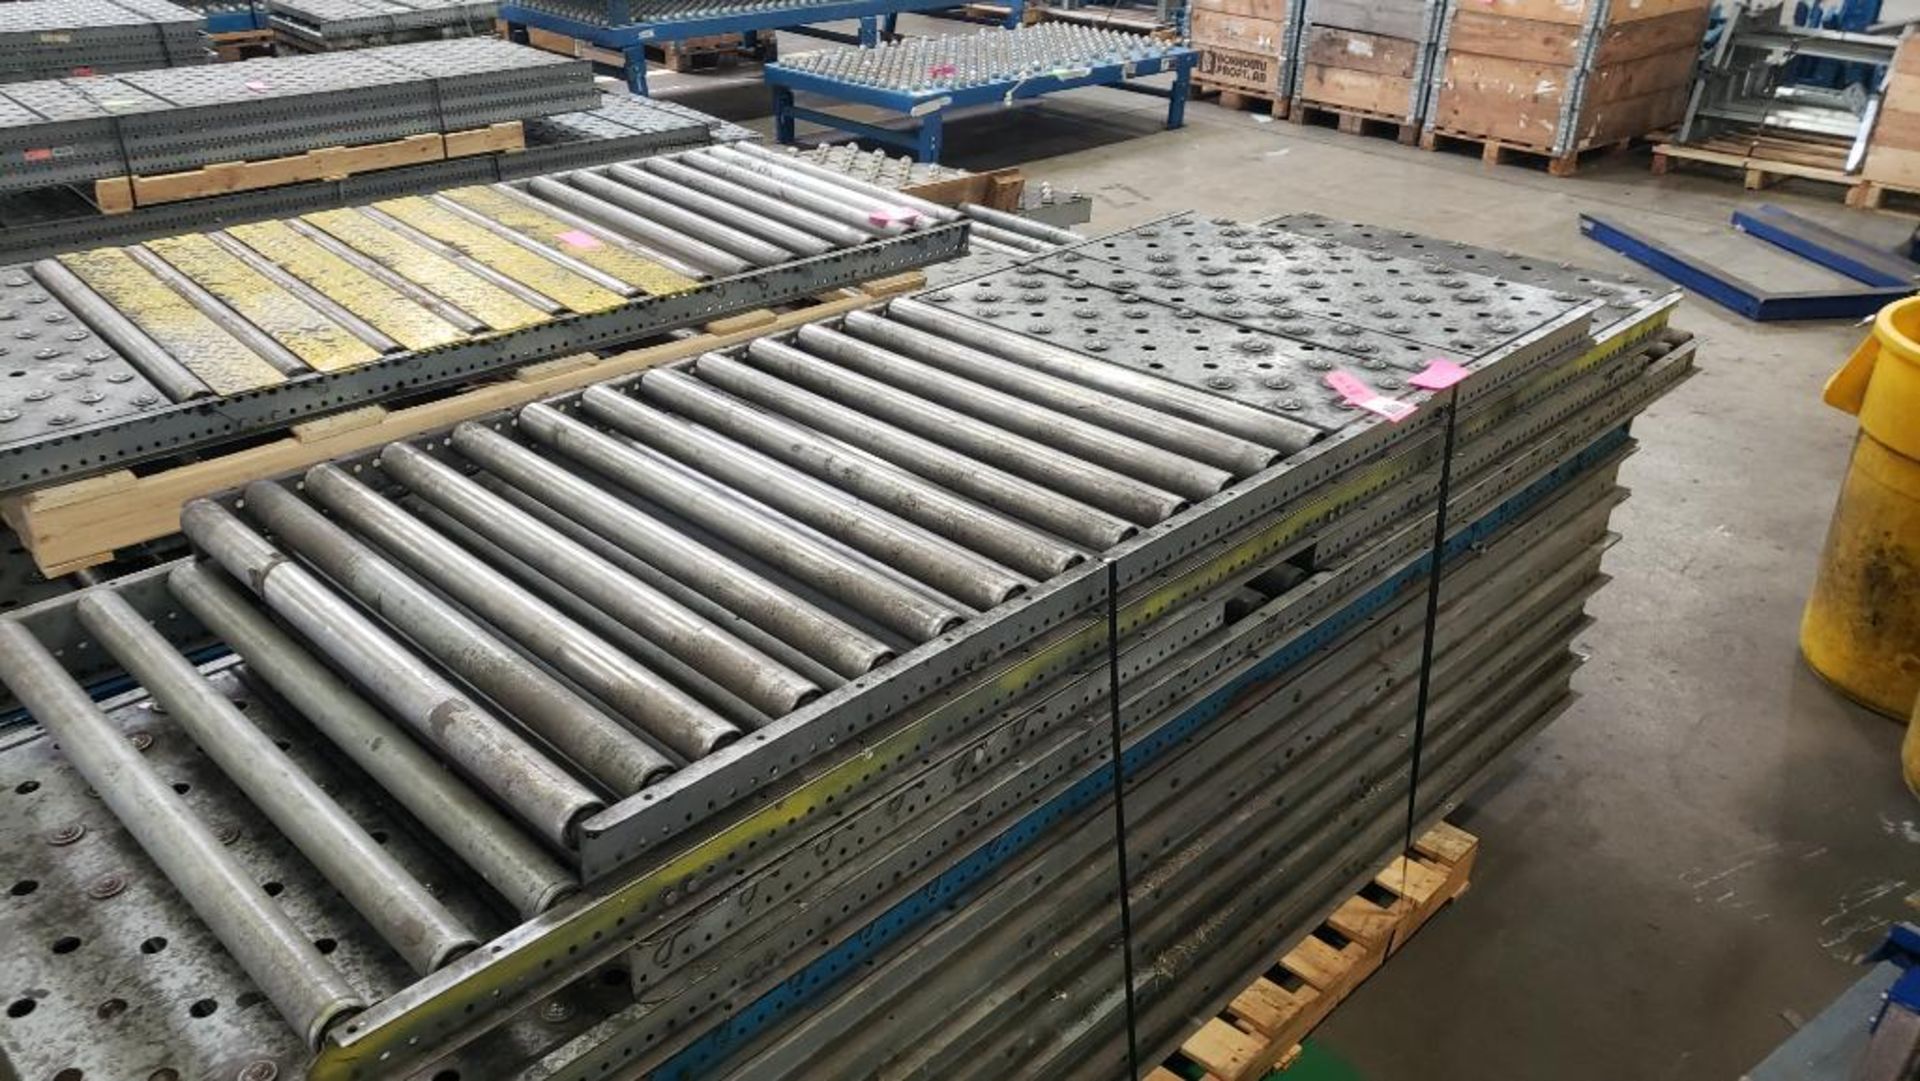 Qty 11 - Sections of roller conveyor. 34" W x 79" longest length. - Image 2 of 4